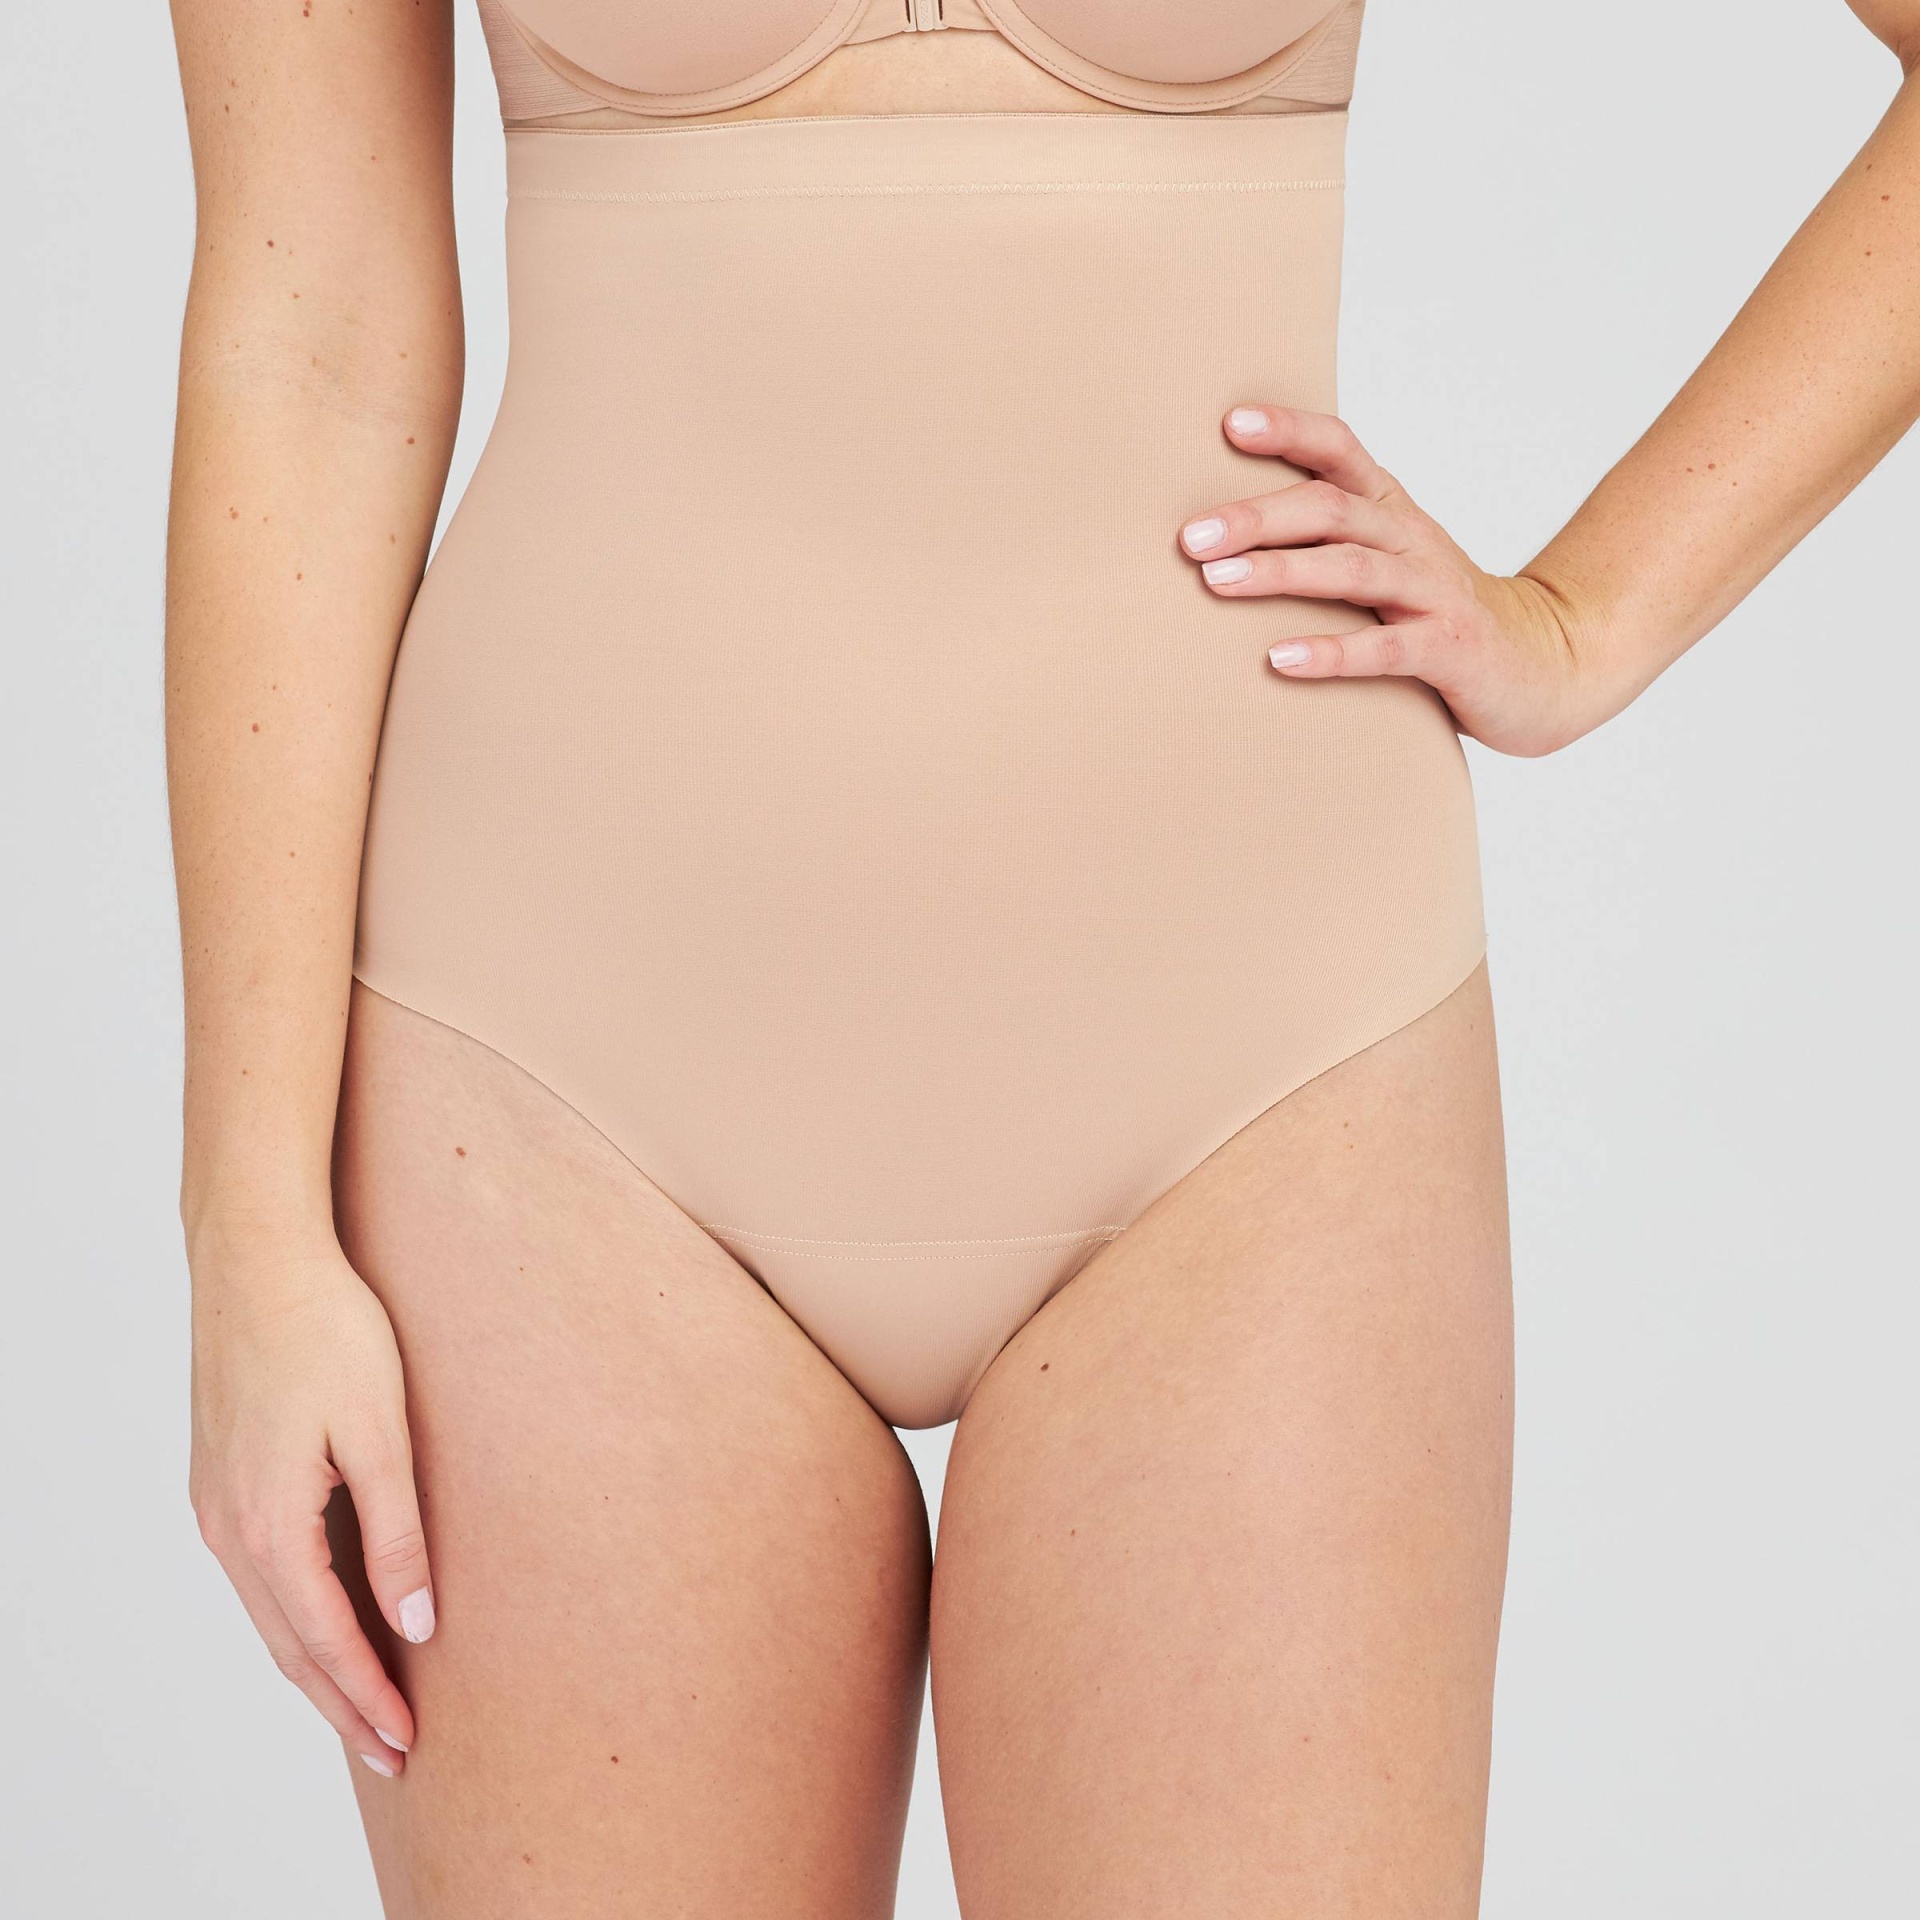 Assets by Spanx Women's High-Waist Shaping Thong - Beige L 1 ct